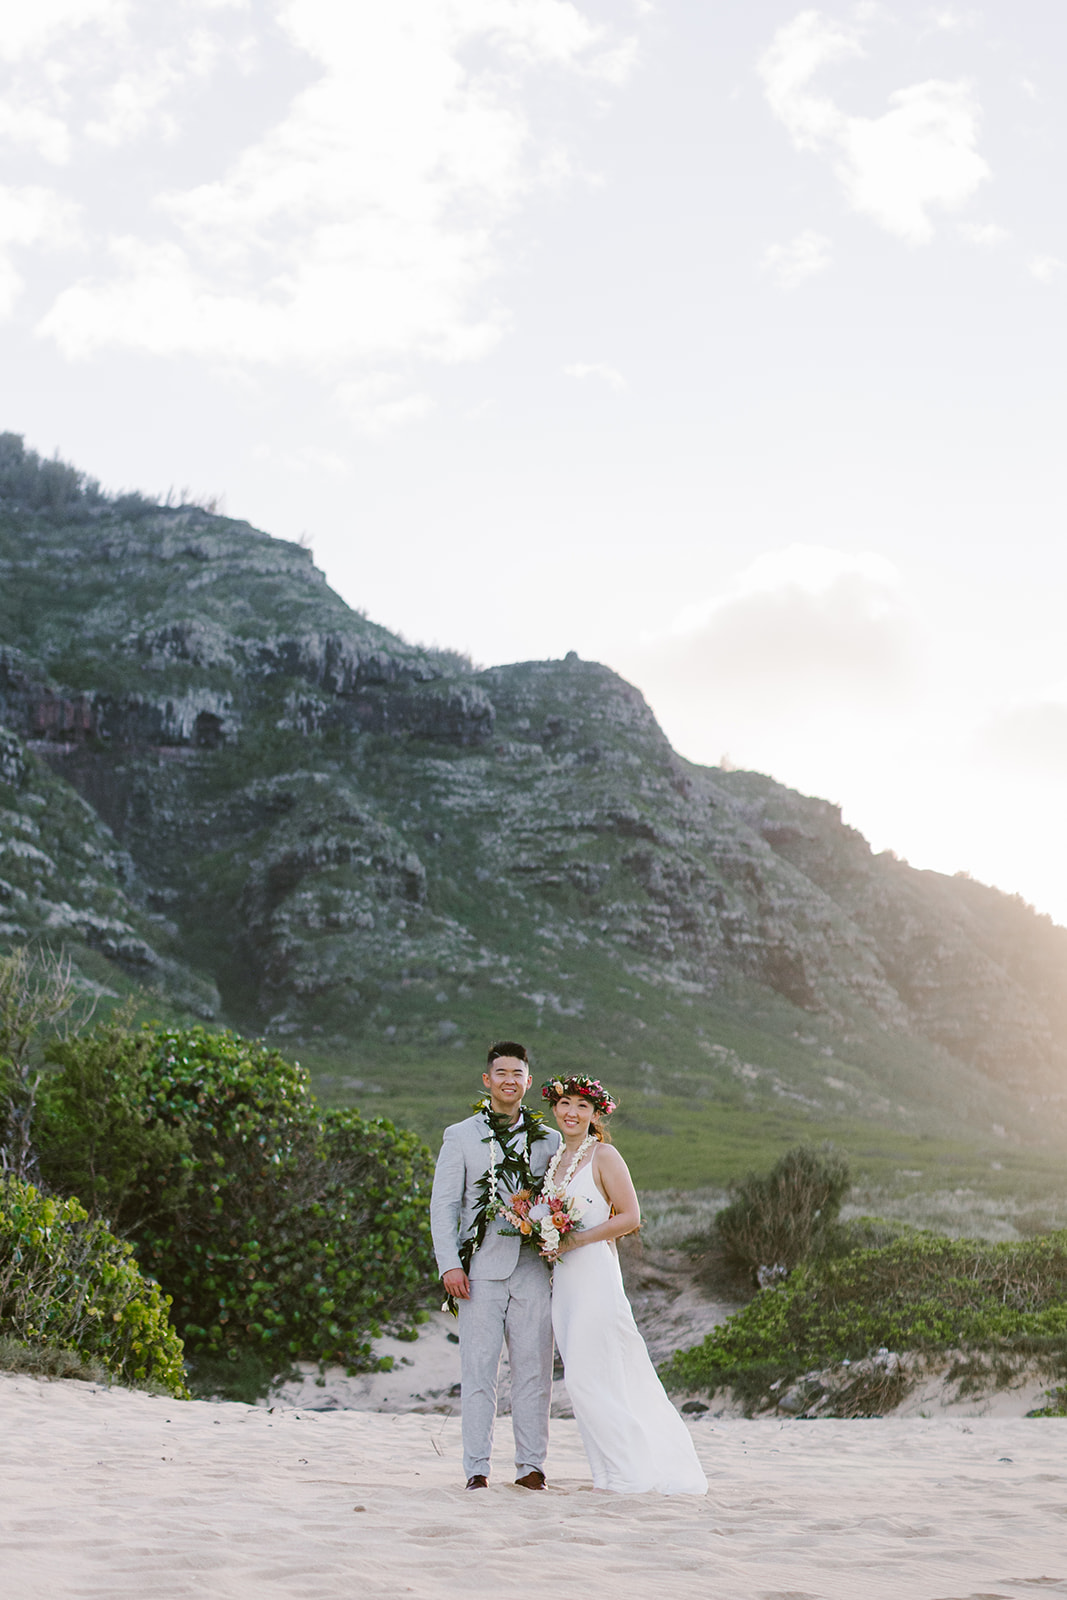 A couple who eloped on the North Shore of Oahu explore the mountains after getting married on a beach in Hawaii. 